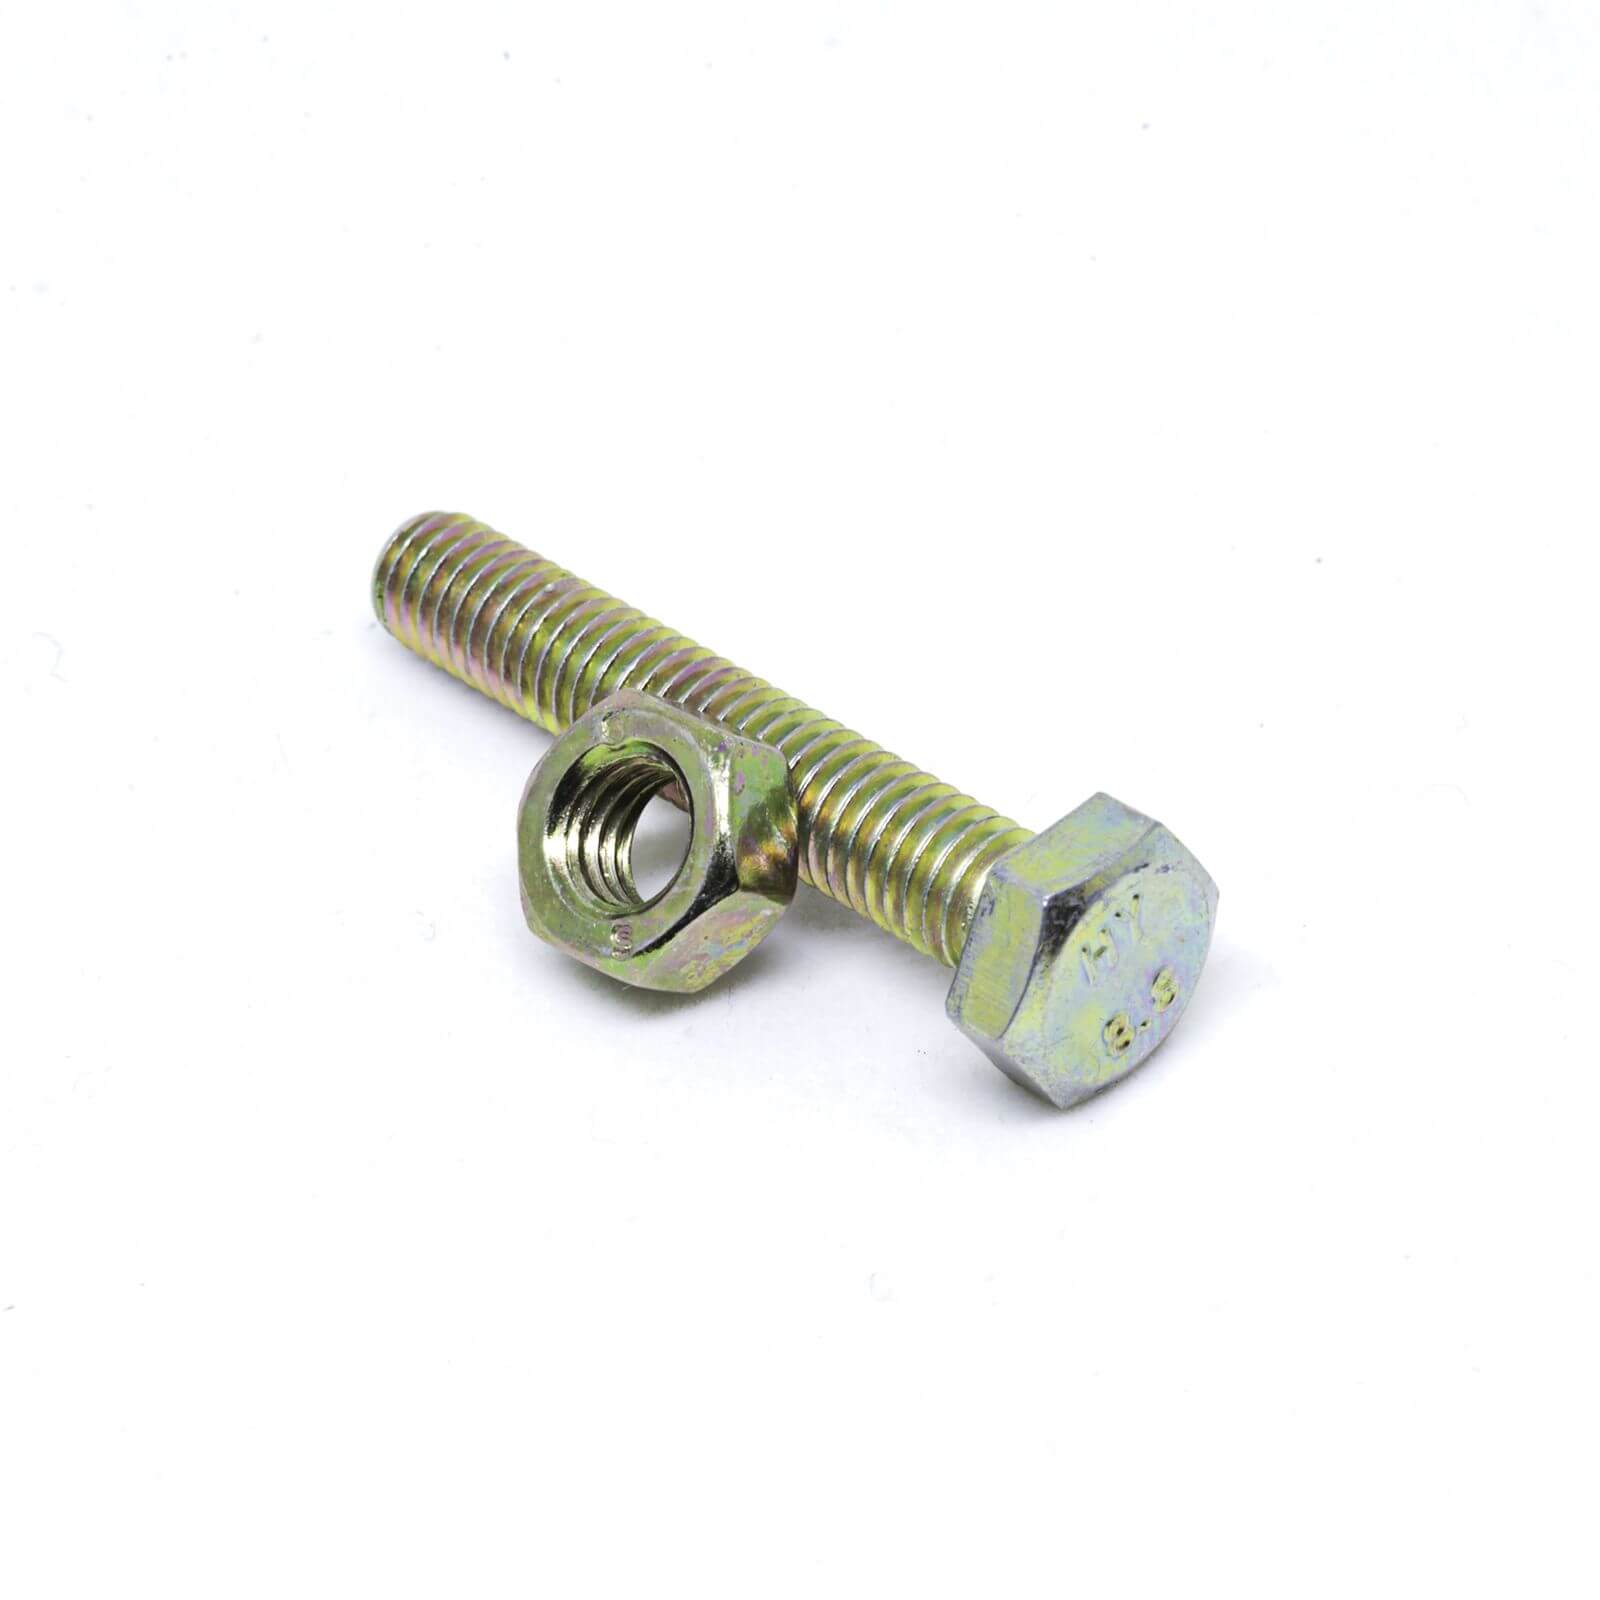 Pinnacle High Tensile Bolts and Nuts - 6 x 40mm - 5 Pack